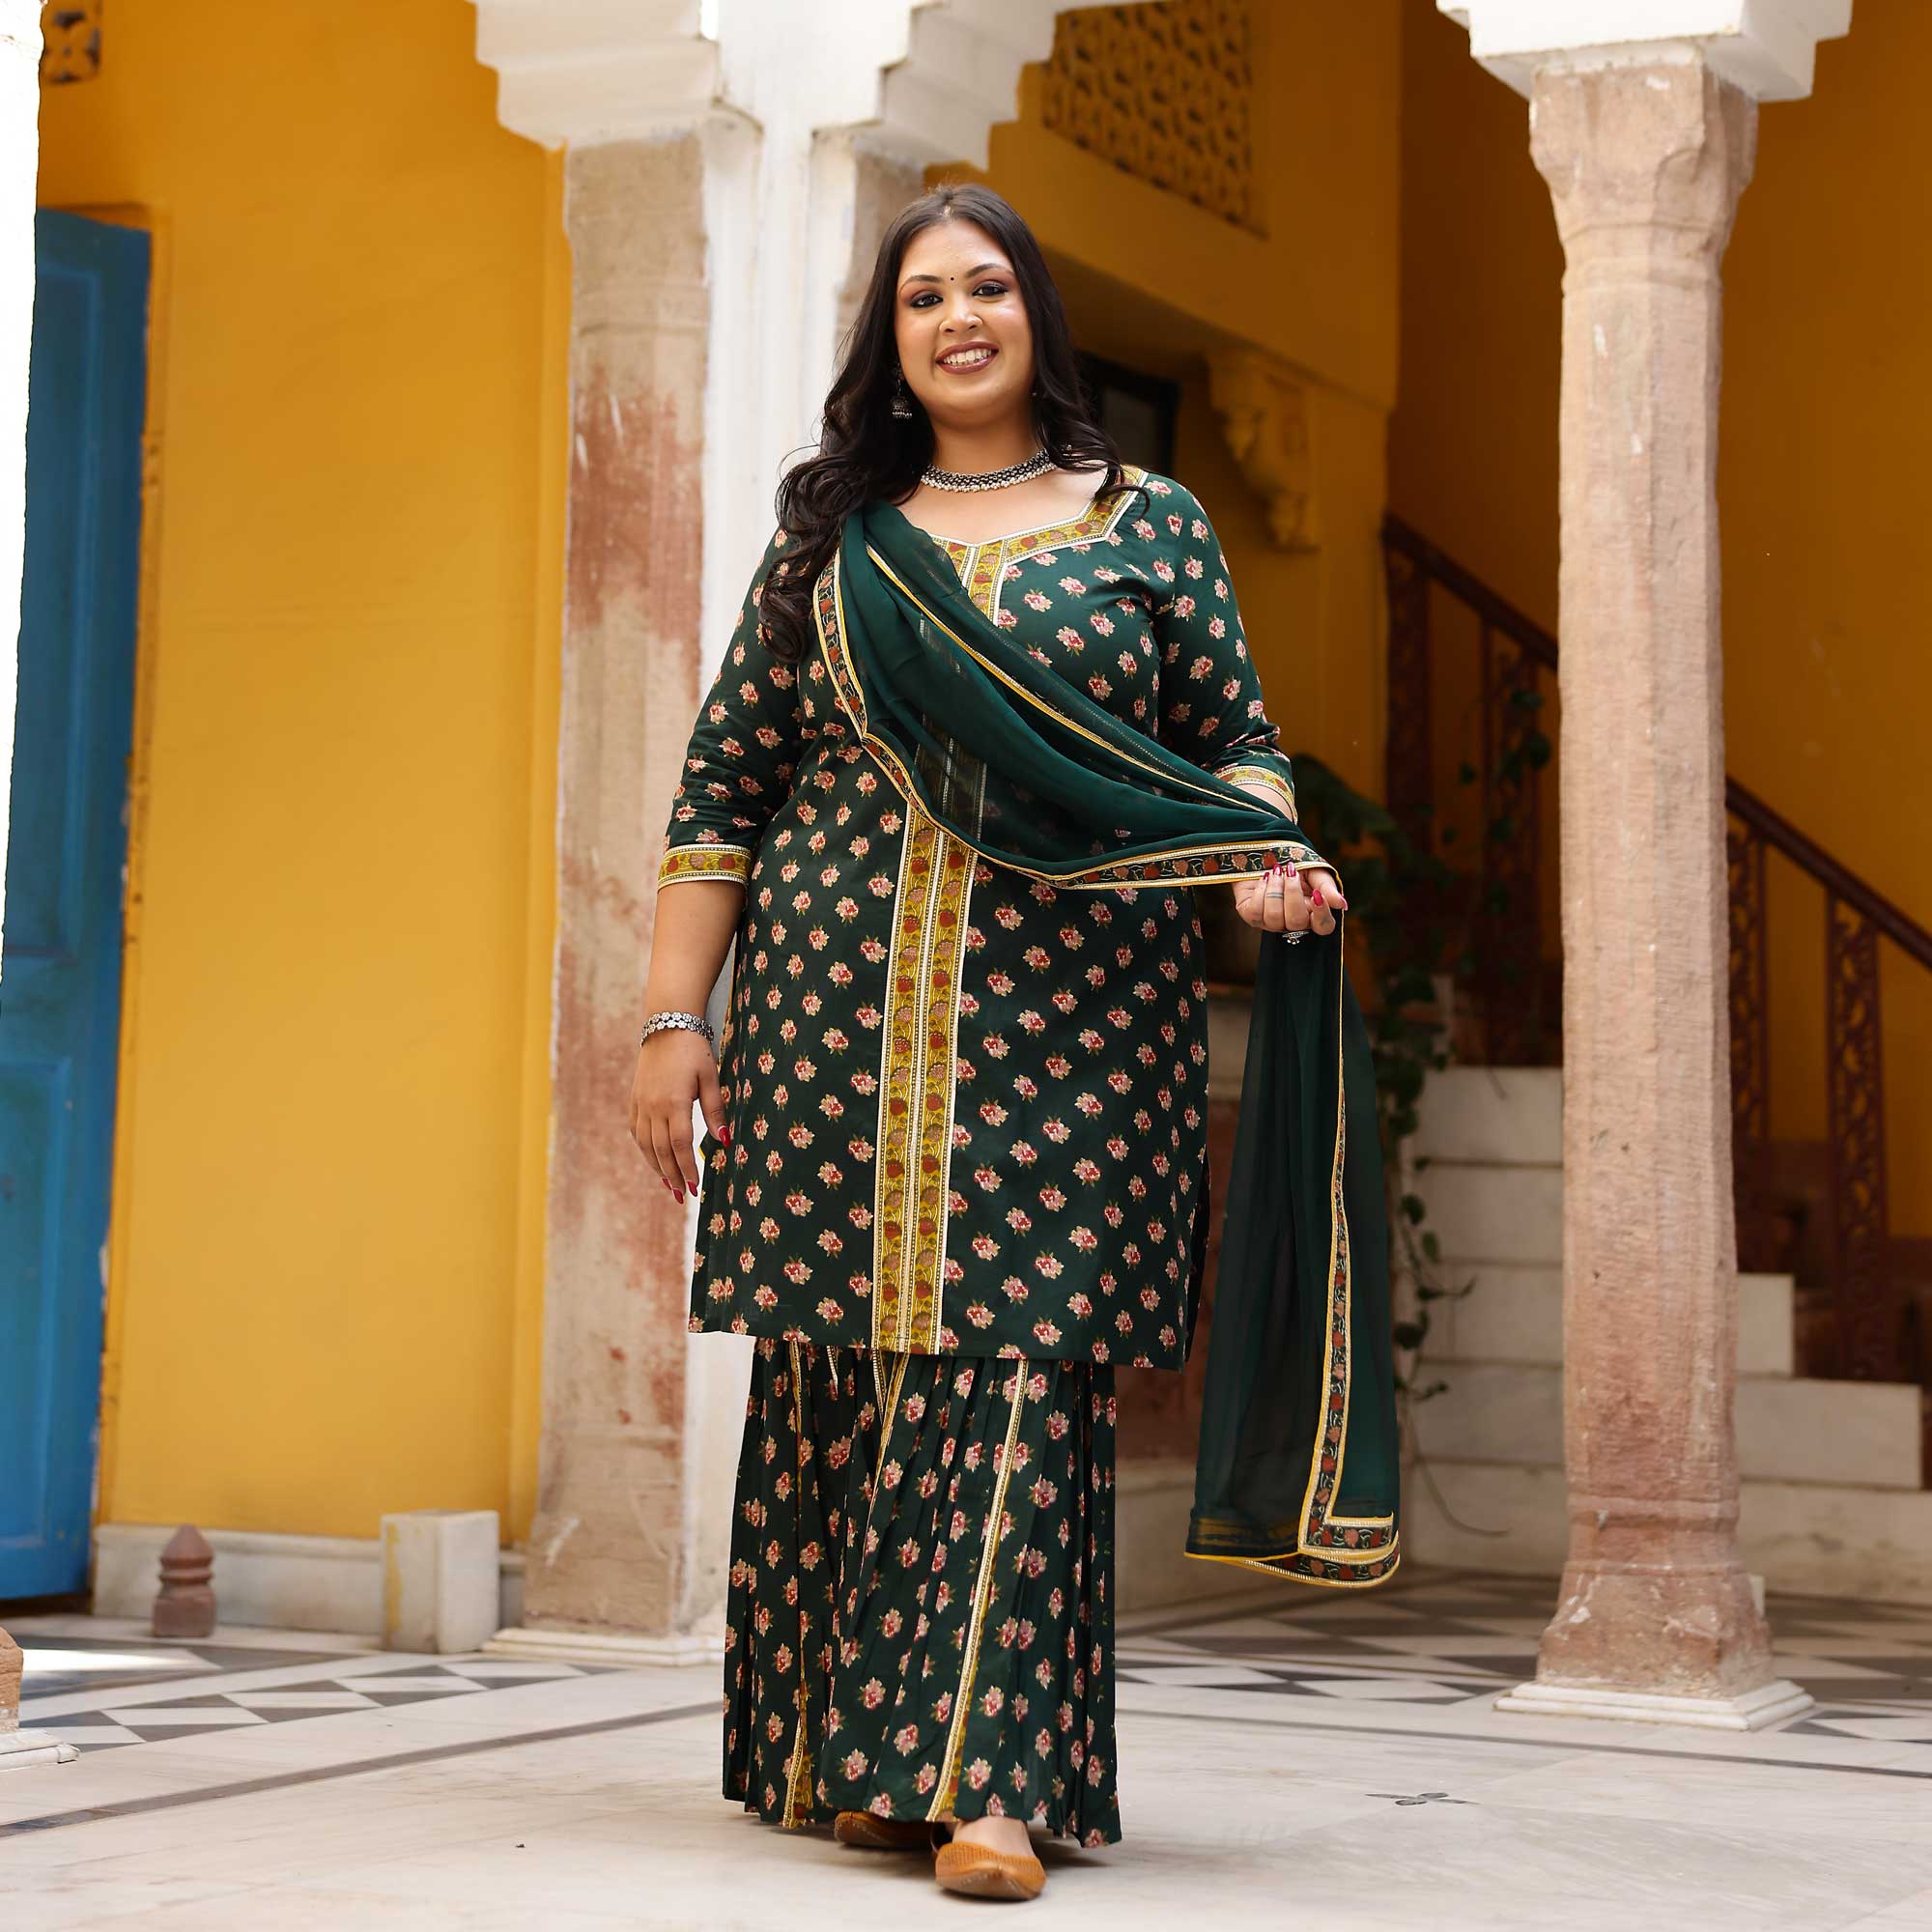 Plain Salwar Suits - These 10 Modern Designs Are Trending Now